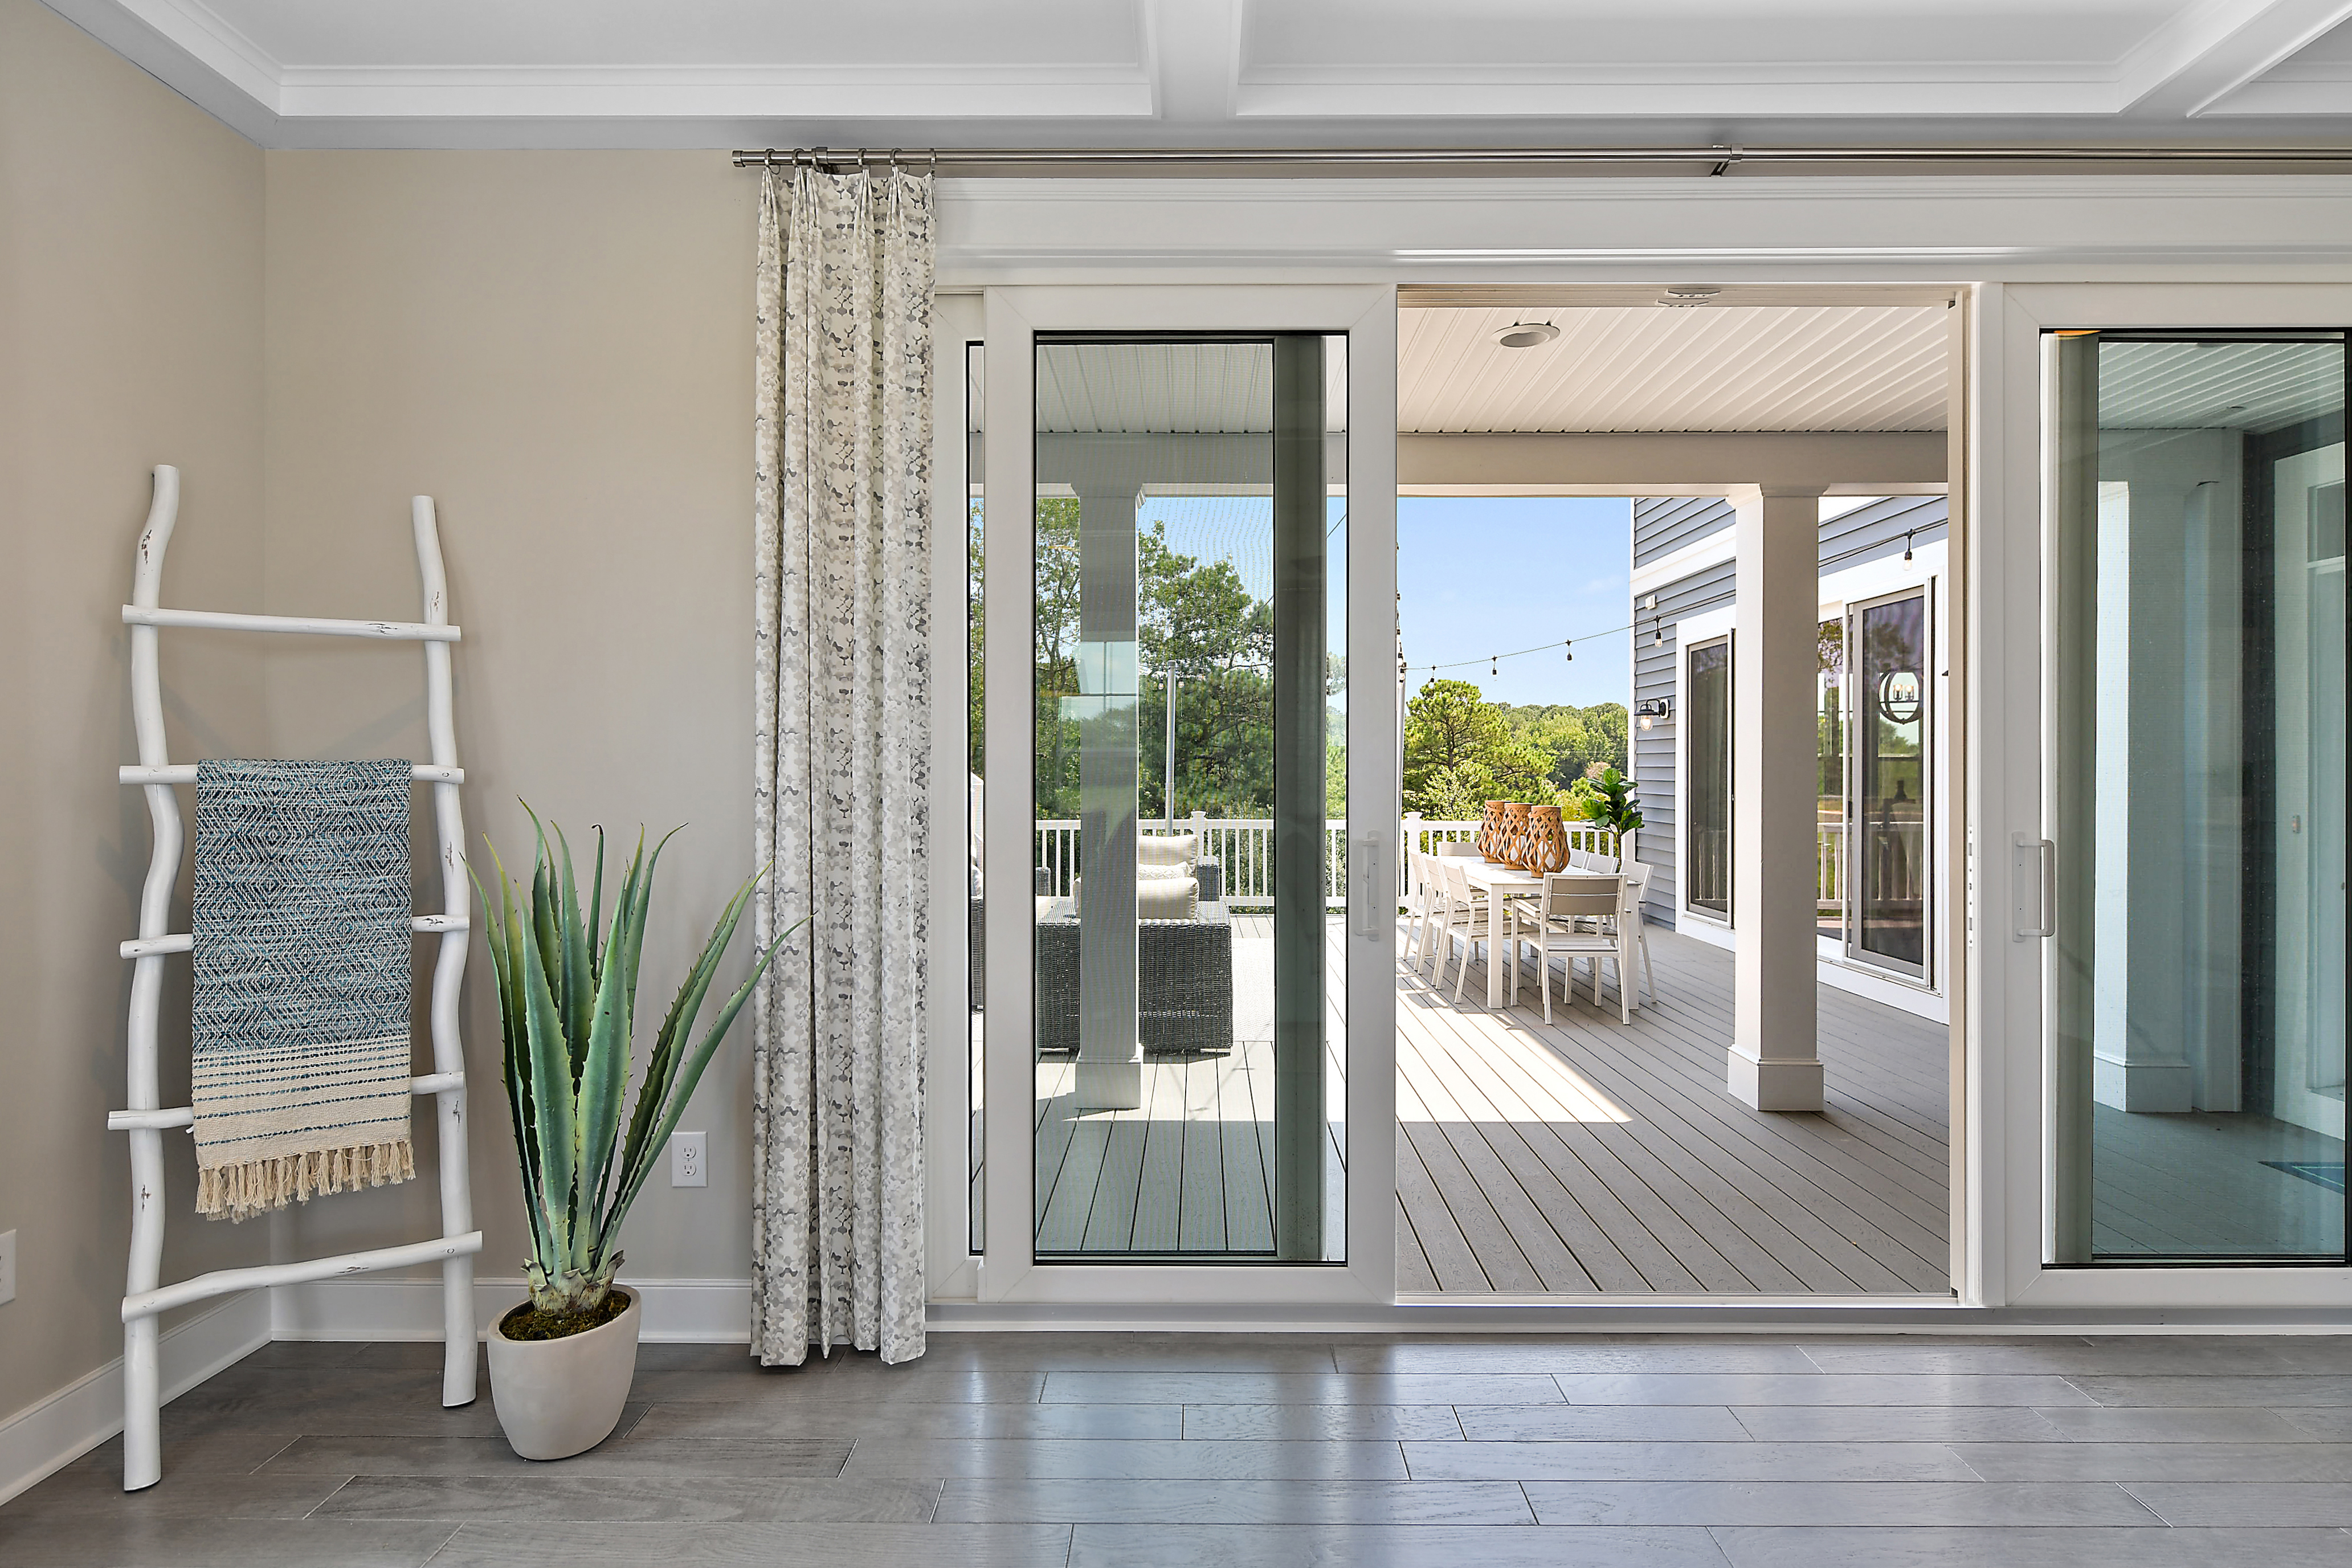 Four Panel Sliding Door from Great Room to Rear Decks